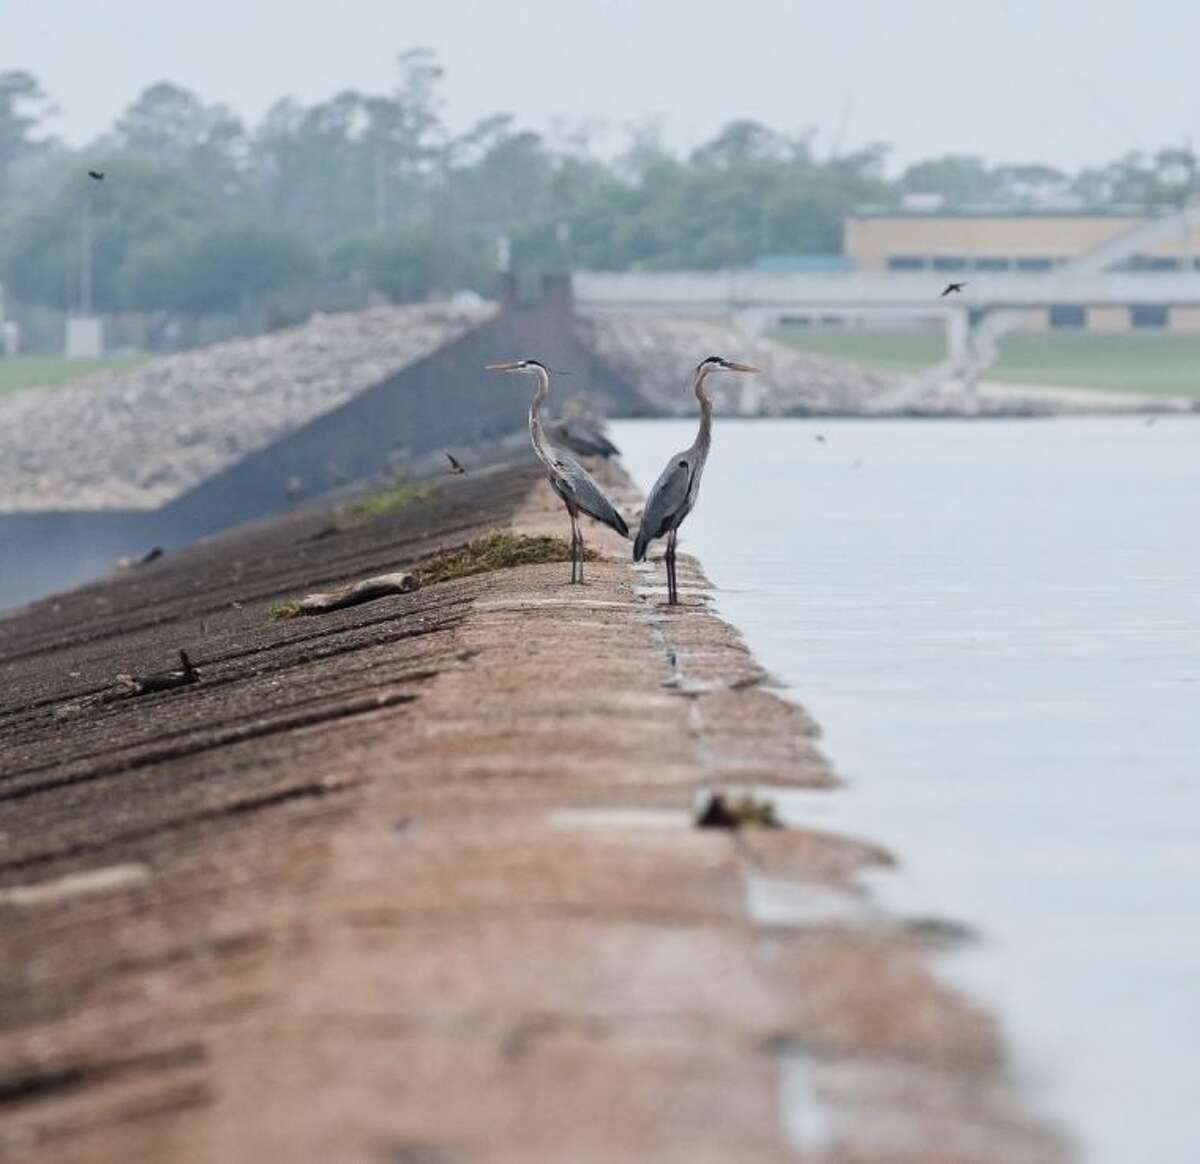 The city has included the addition of flood gates to the Lake Houston Dam as one of its priorty flood control projects.